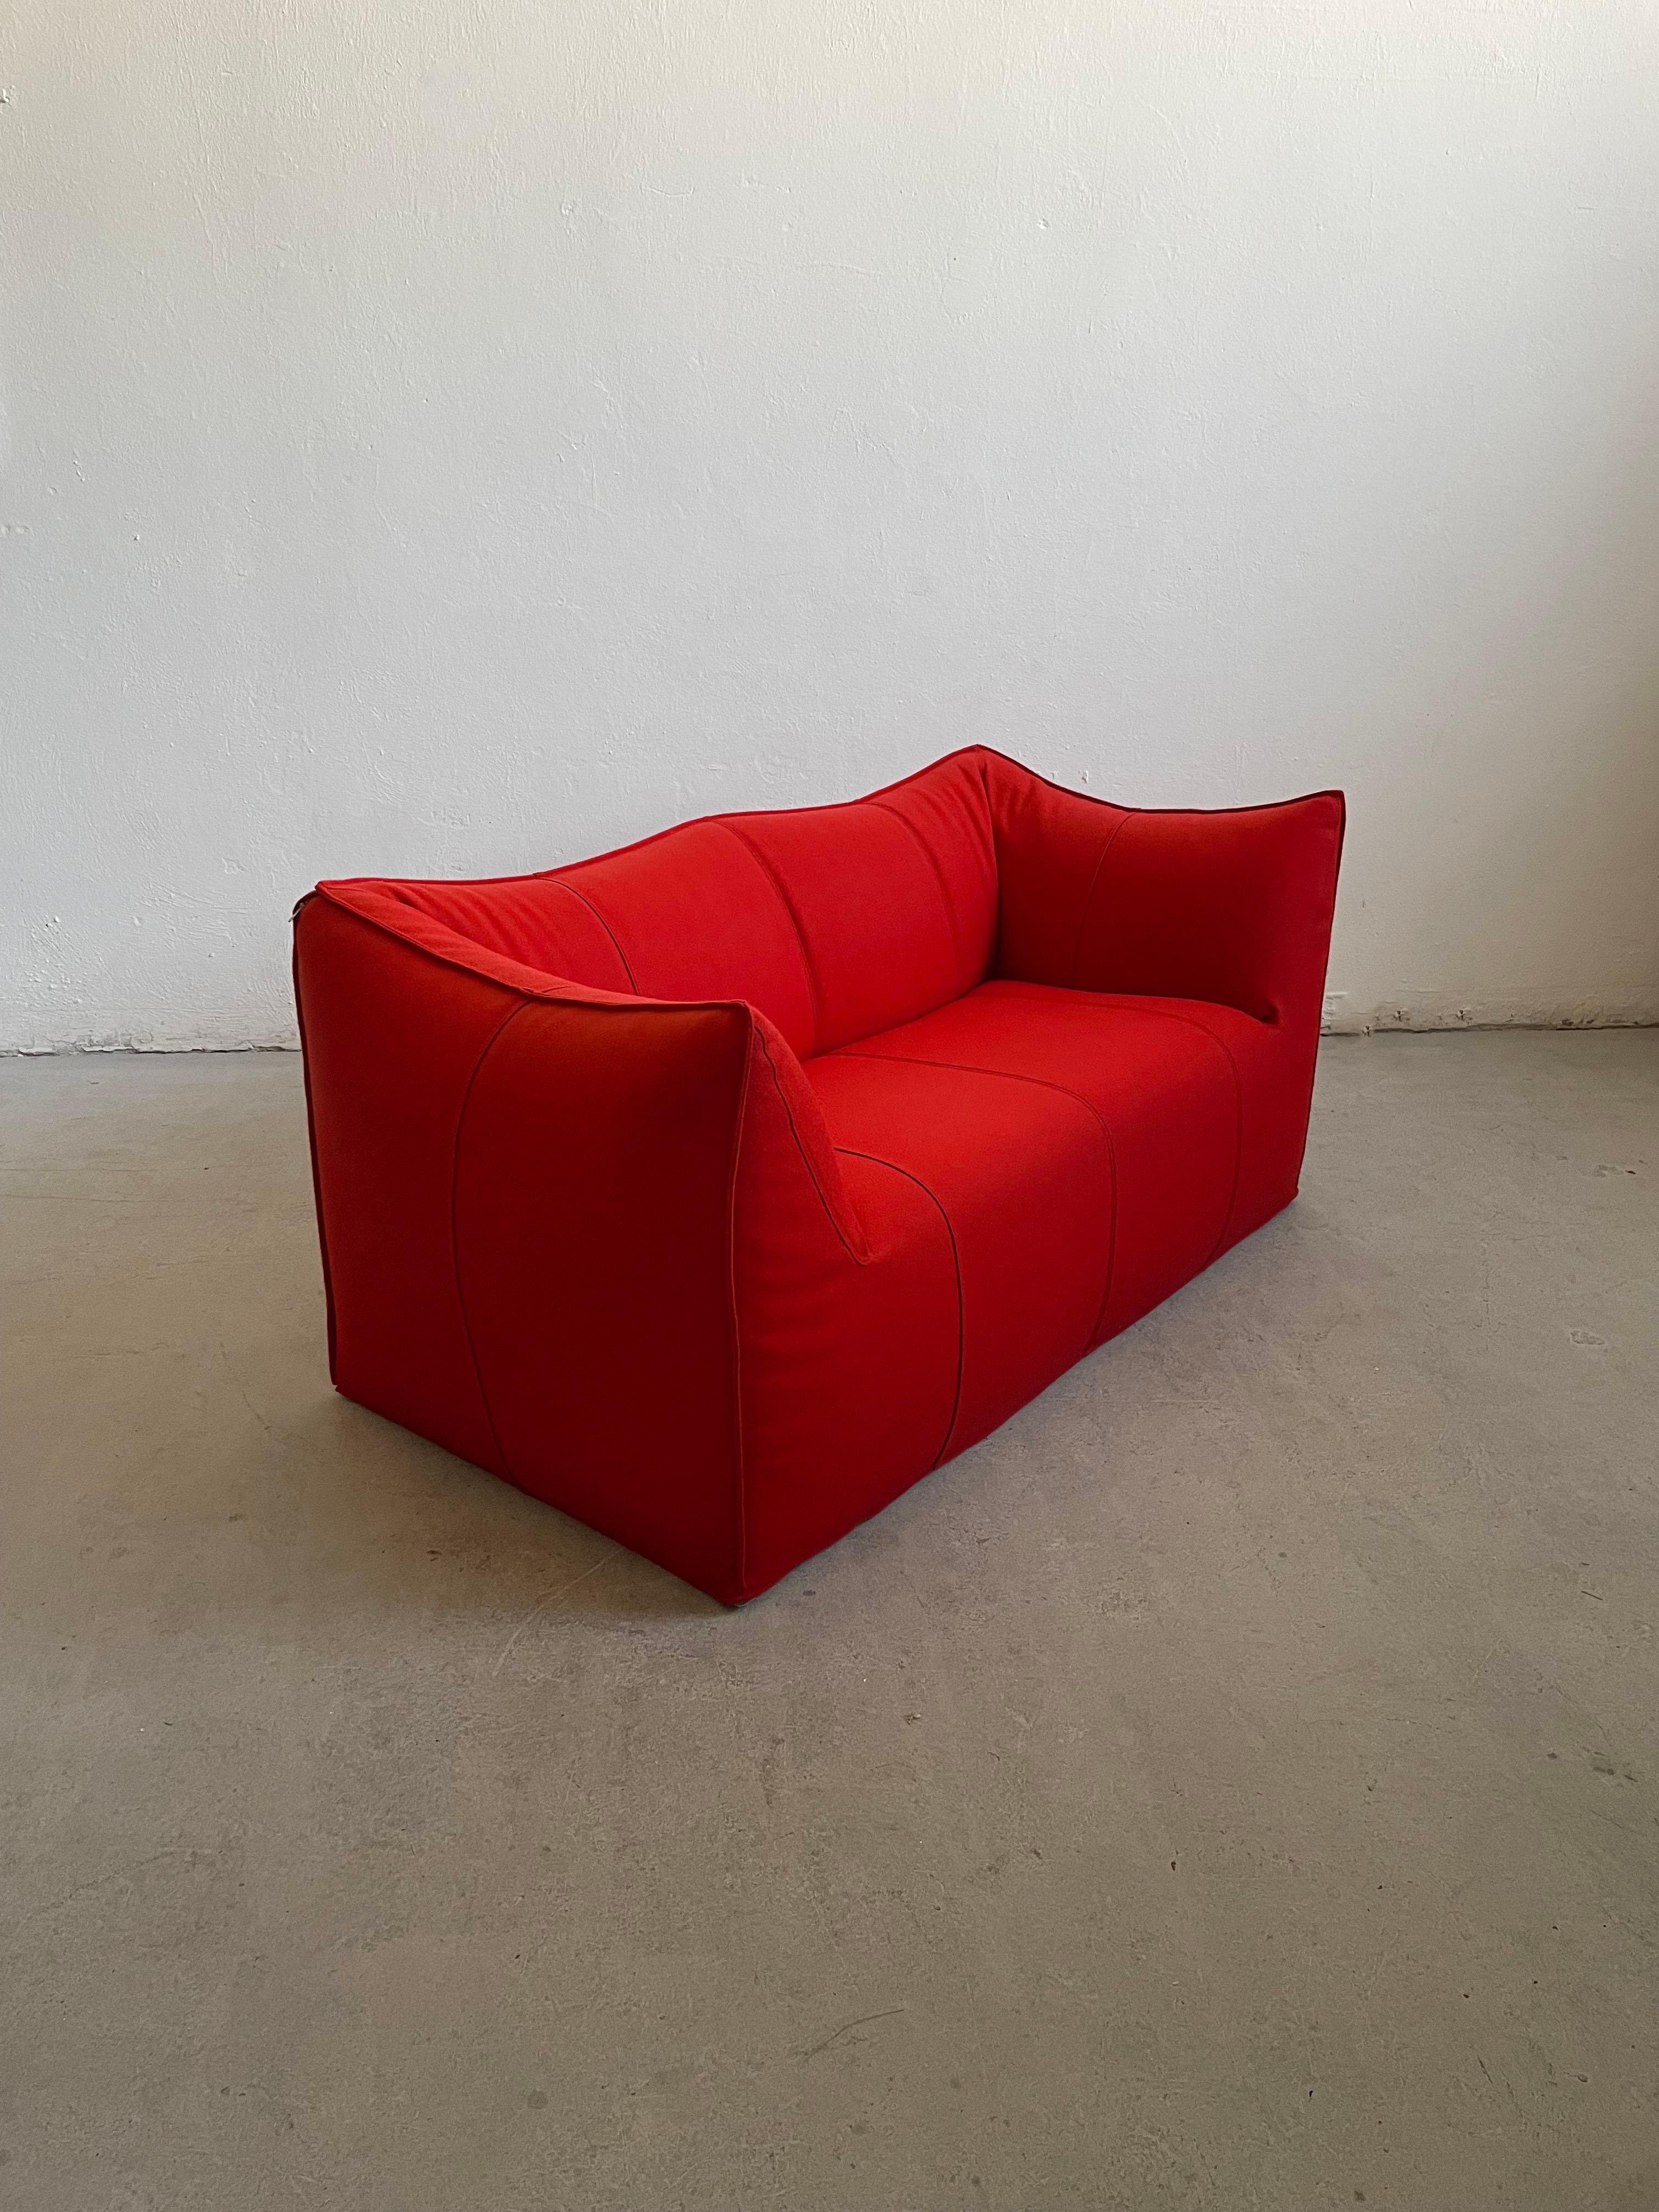 Le Bambole by Mario Bellini for B&B Italia is a design icon of the seventies.

Offered for sale is a 2-seat sofa, 2007 edition with removable cover in beautiful red wool fabric

The removable has some flaws (detailed description in the condition